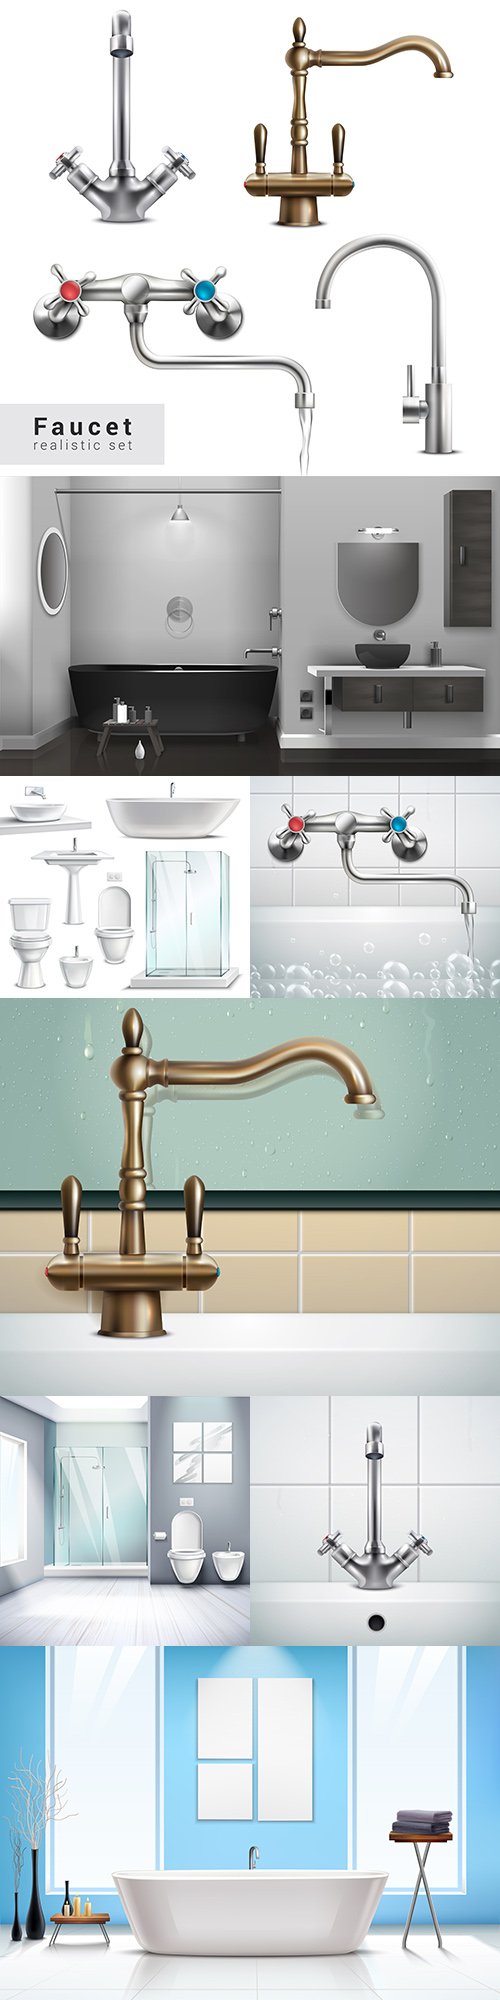 Bathroom interior and water mixers realistic illustrations